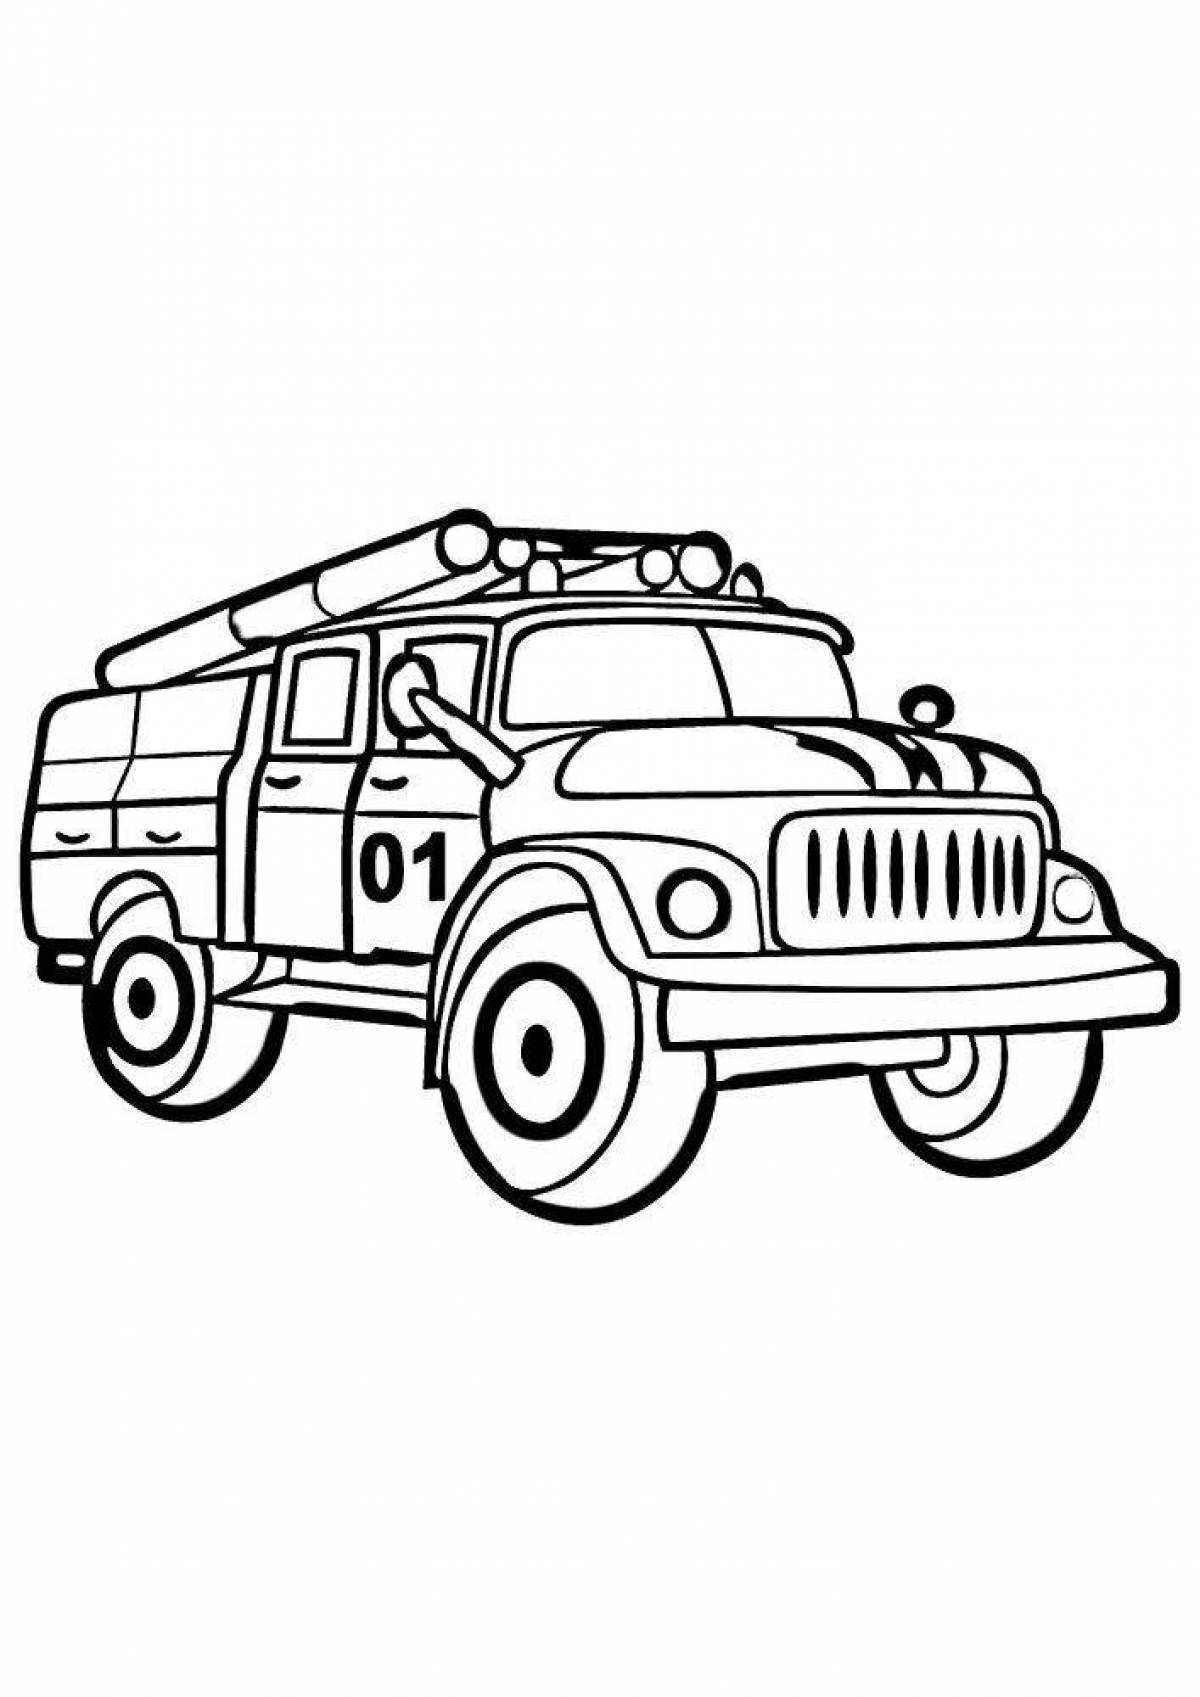 Gorgeous fire truck coloring page